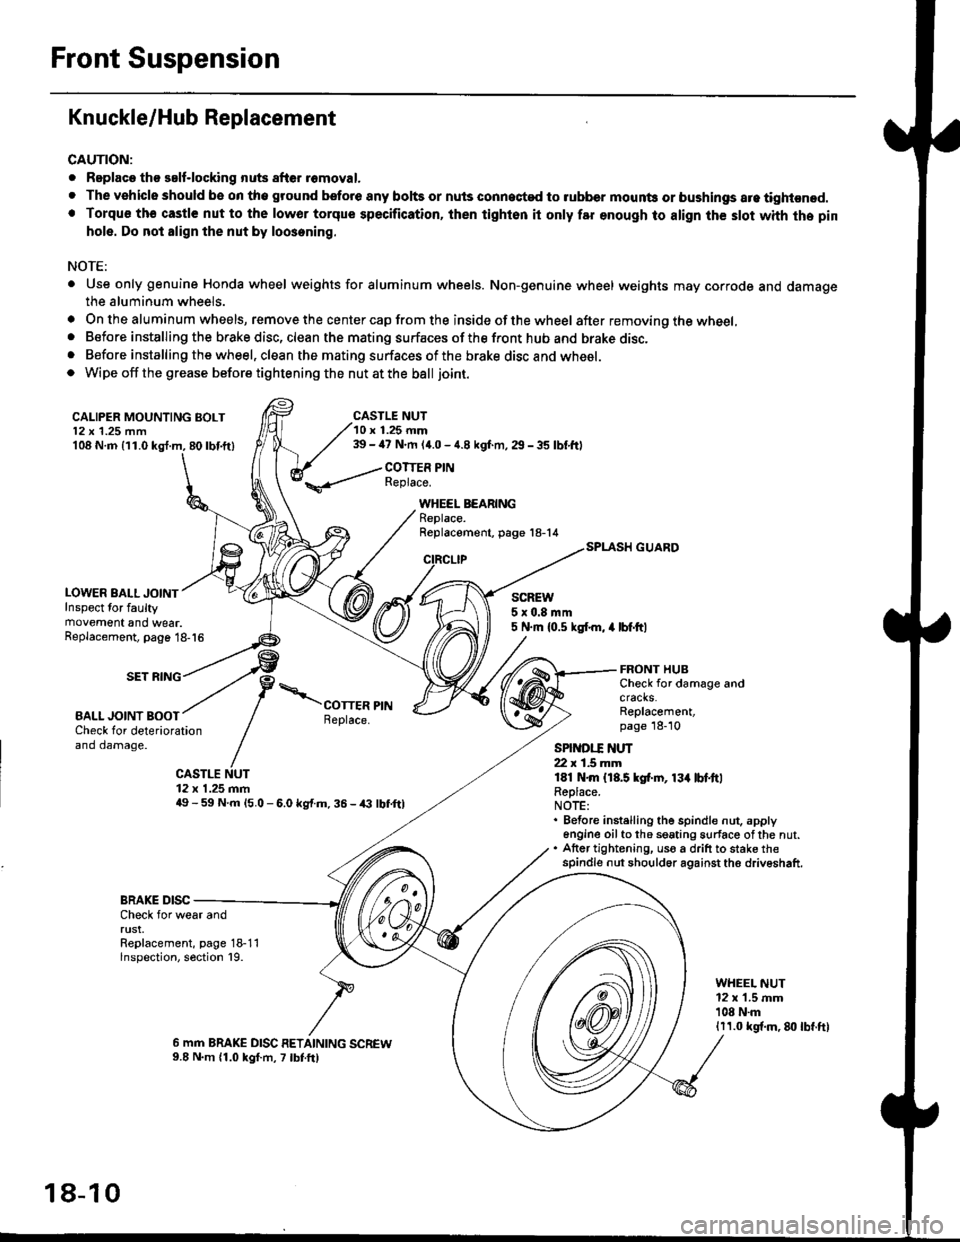 HONDA CIVIC 1997 6.G Workshop Manual Front Suspension
Knuckle/Hub Replacement
CAUTION:
. Replaco tho salf-locking nuts after romoval.
. The vehiclo should be on tho ground bsfore any bohs or nuls connected to rubber mounb or bushings are